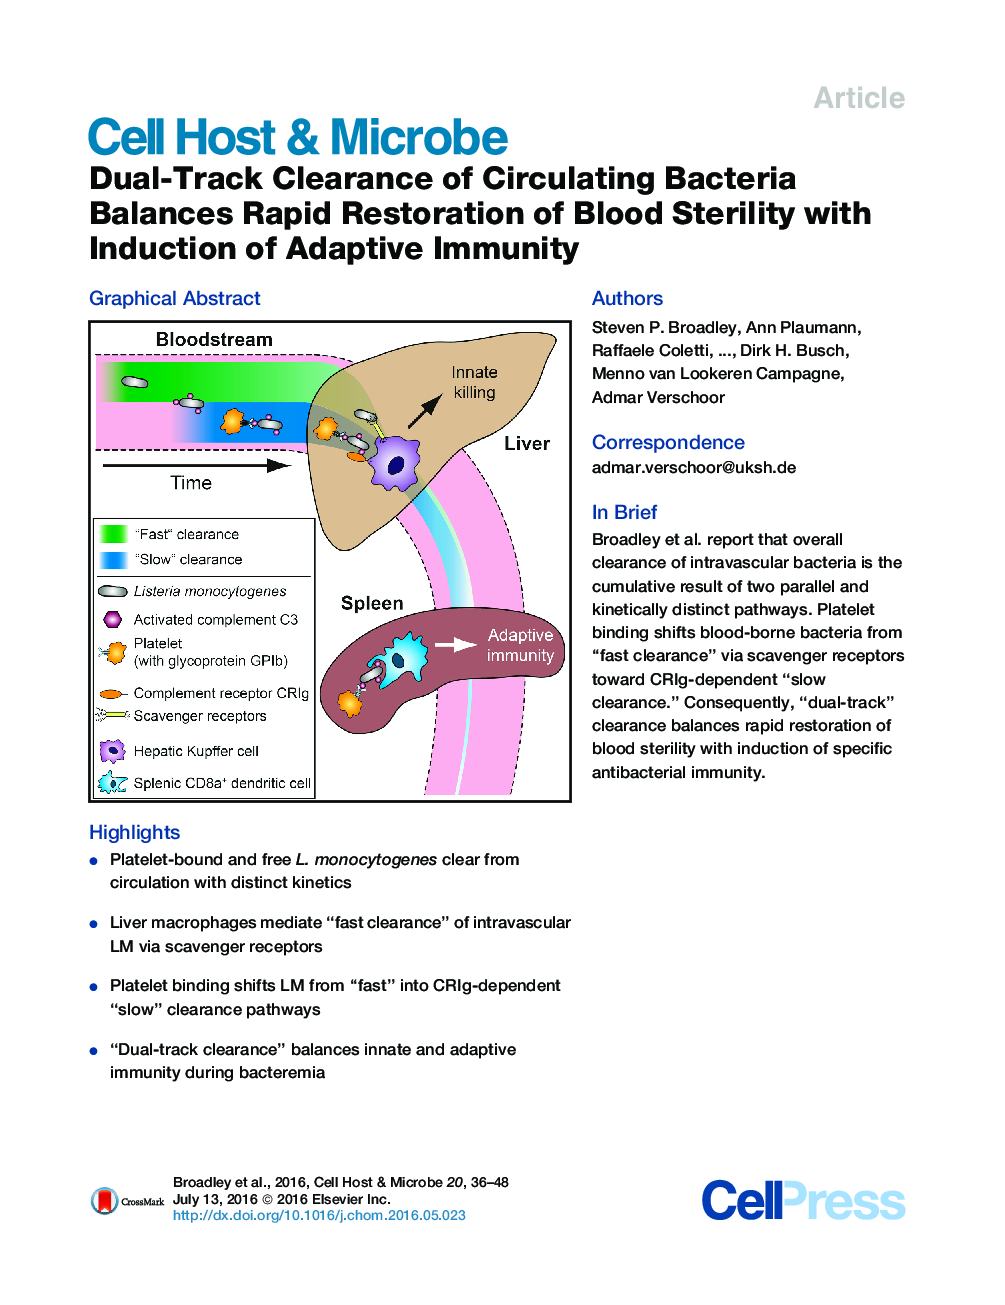 Dual-Track Clearance of Circulating Bacteria Balances Rapid Restoration of Blood Sterility with Induction of Adaptive Immunity